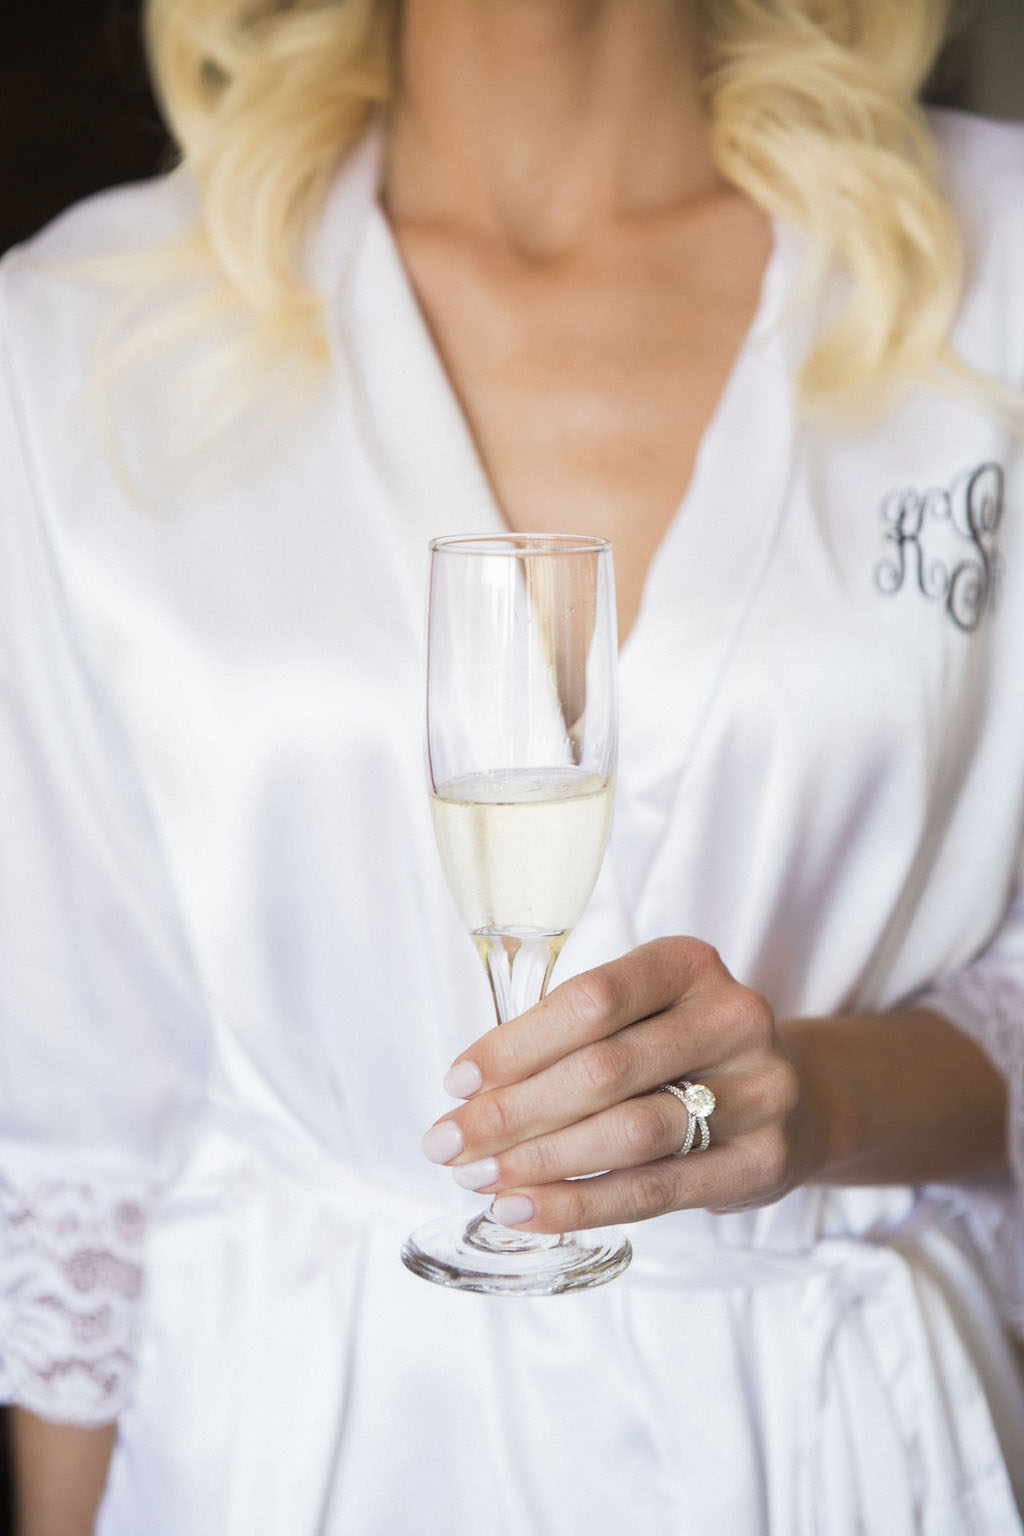 Bride Getting Ready Portrait in Monogrammed White Silk Robe with Champagne Glass | Tampa Bay Wedding Photographer K&K Photography